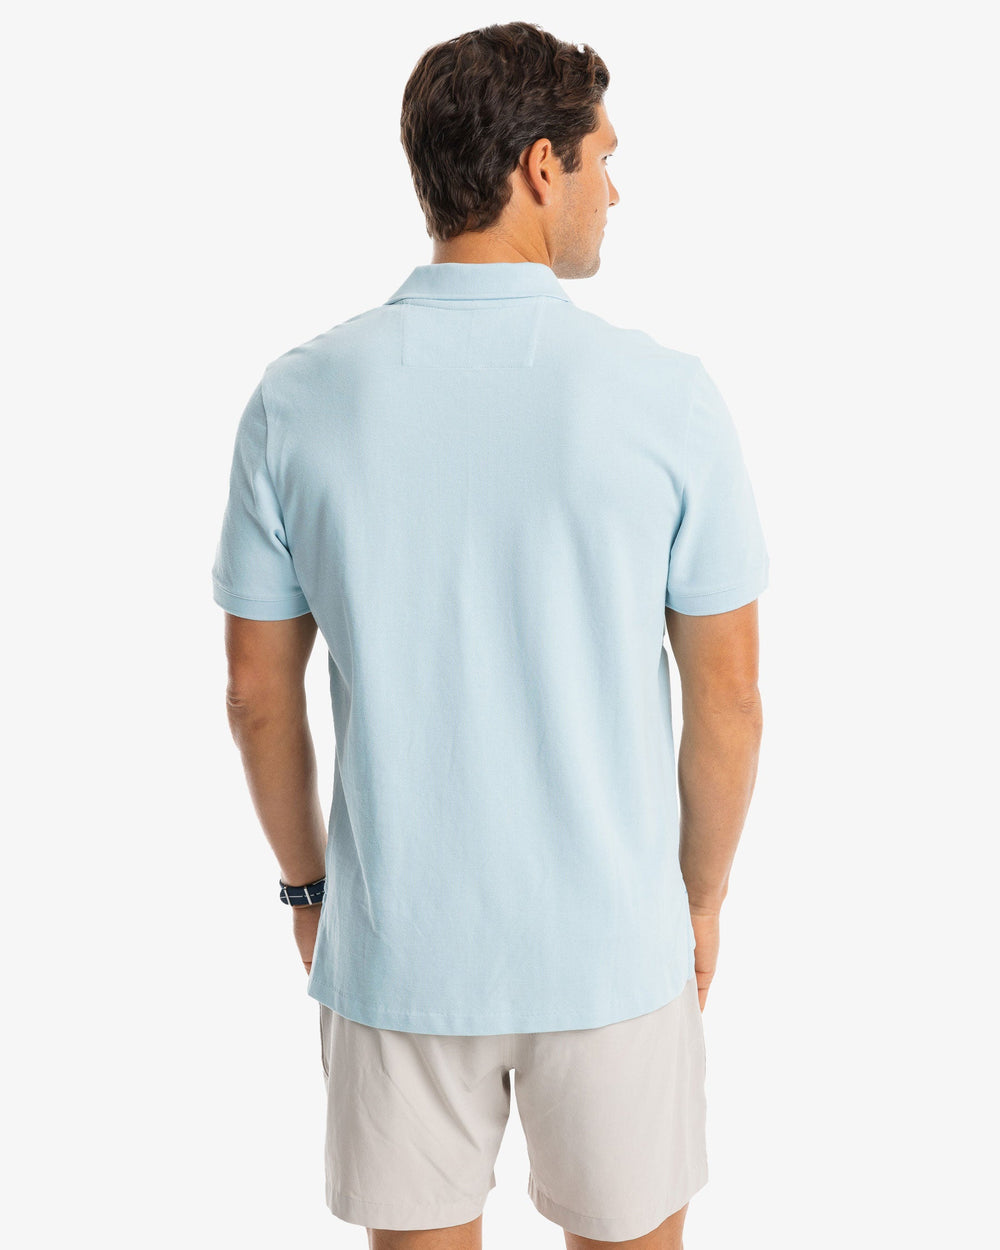 The model back view of the Men's New Skipjack Polo Shirt by Southern Tide - Aquamarine